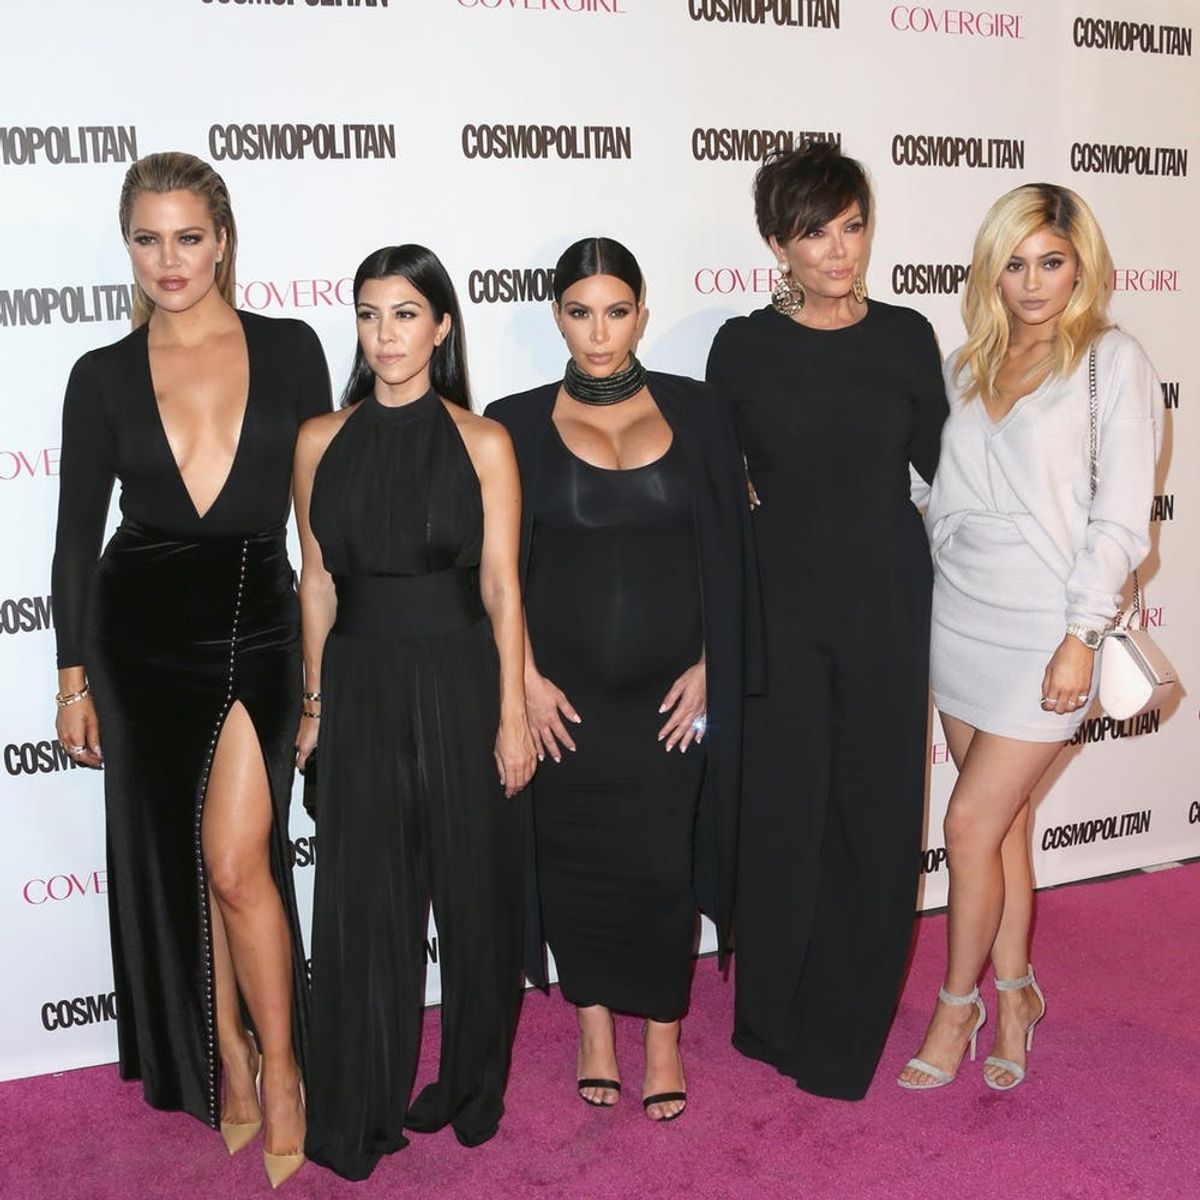 Here’s Why the 2018 Kardashian Family Christmas Card Is Missing a Few People